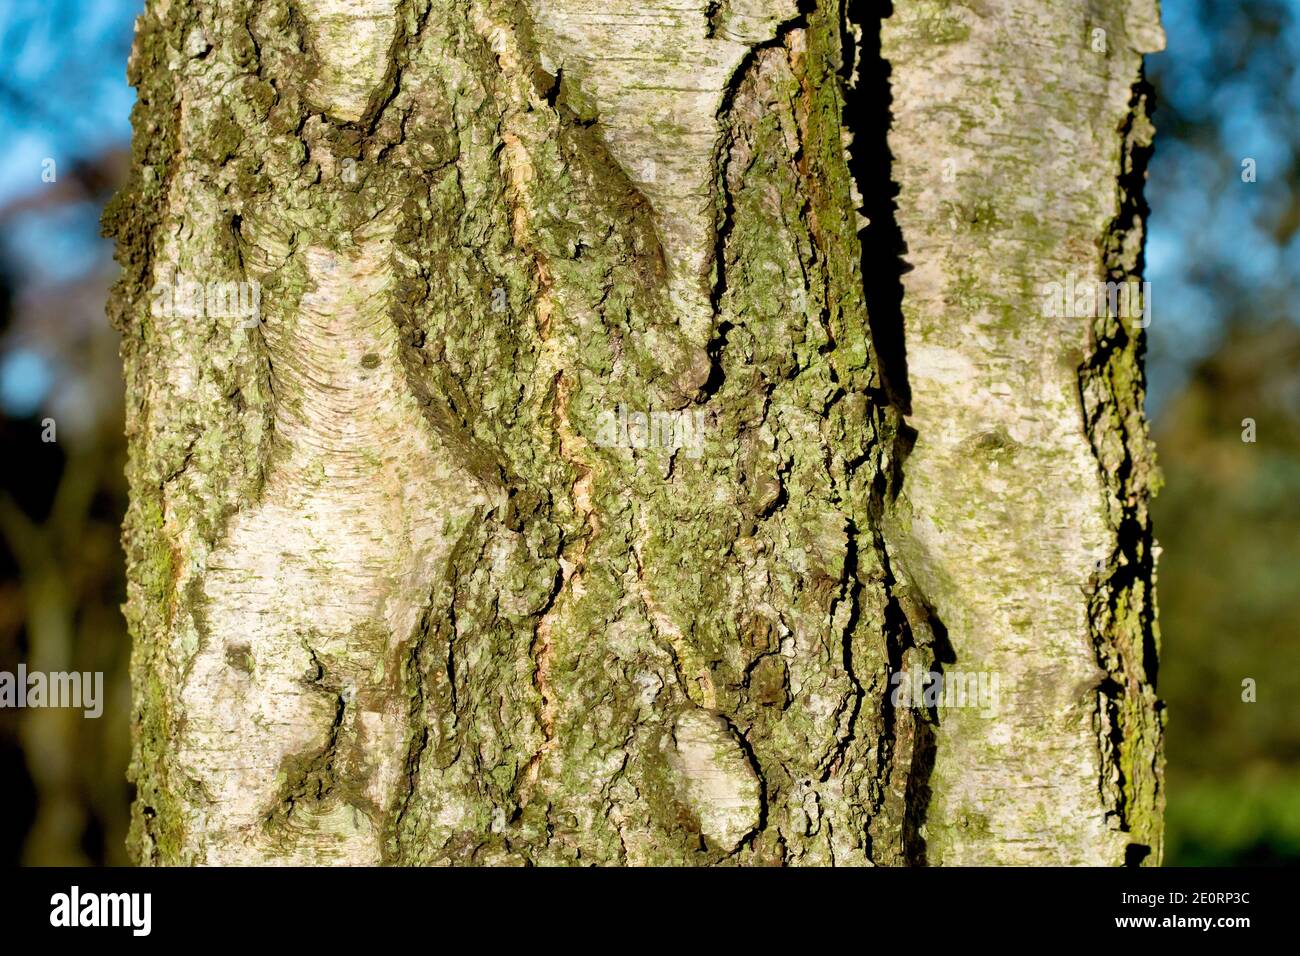 Close up of the bark of a mature Silver Birch tree (betula pendula), showing both the rough and smooth texture of its surface. Stock Photo